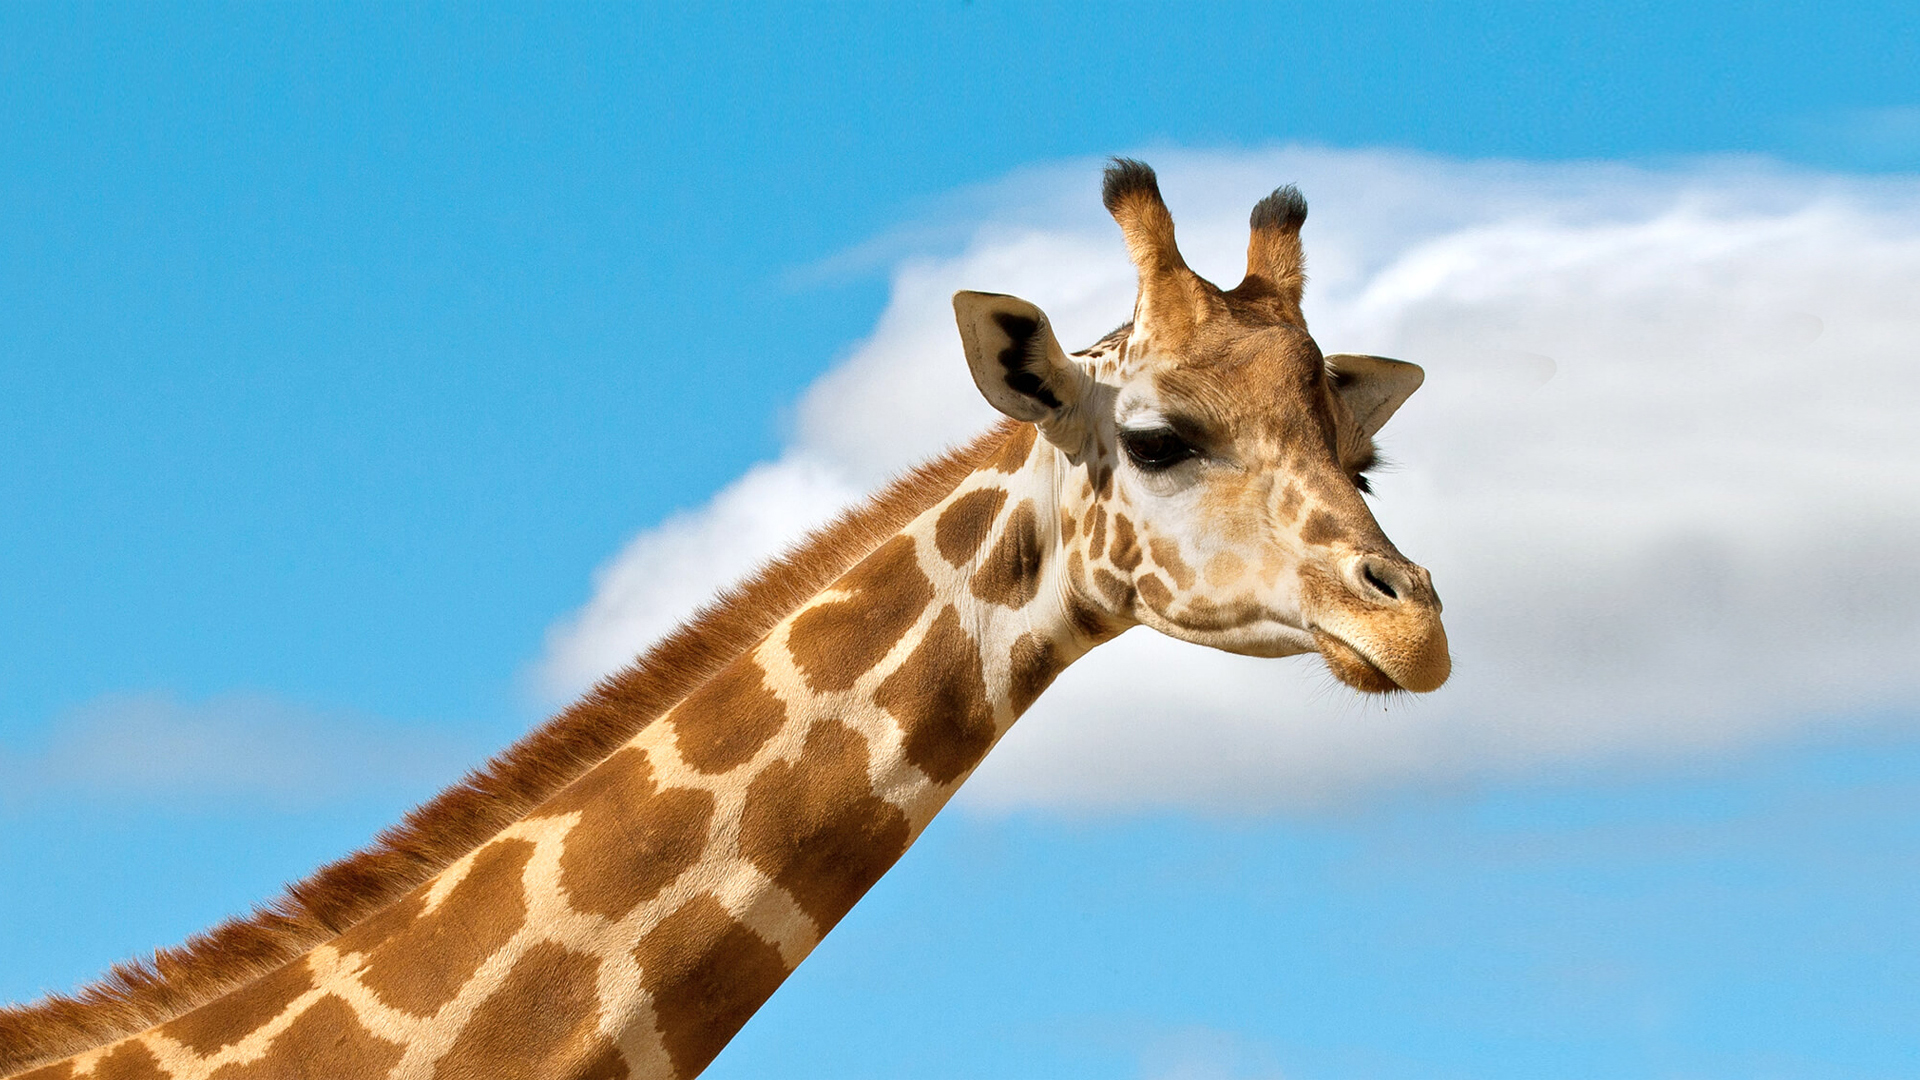 5 Fascinating Facts About Giraffes You Probably Didn’t Know